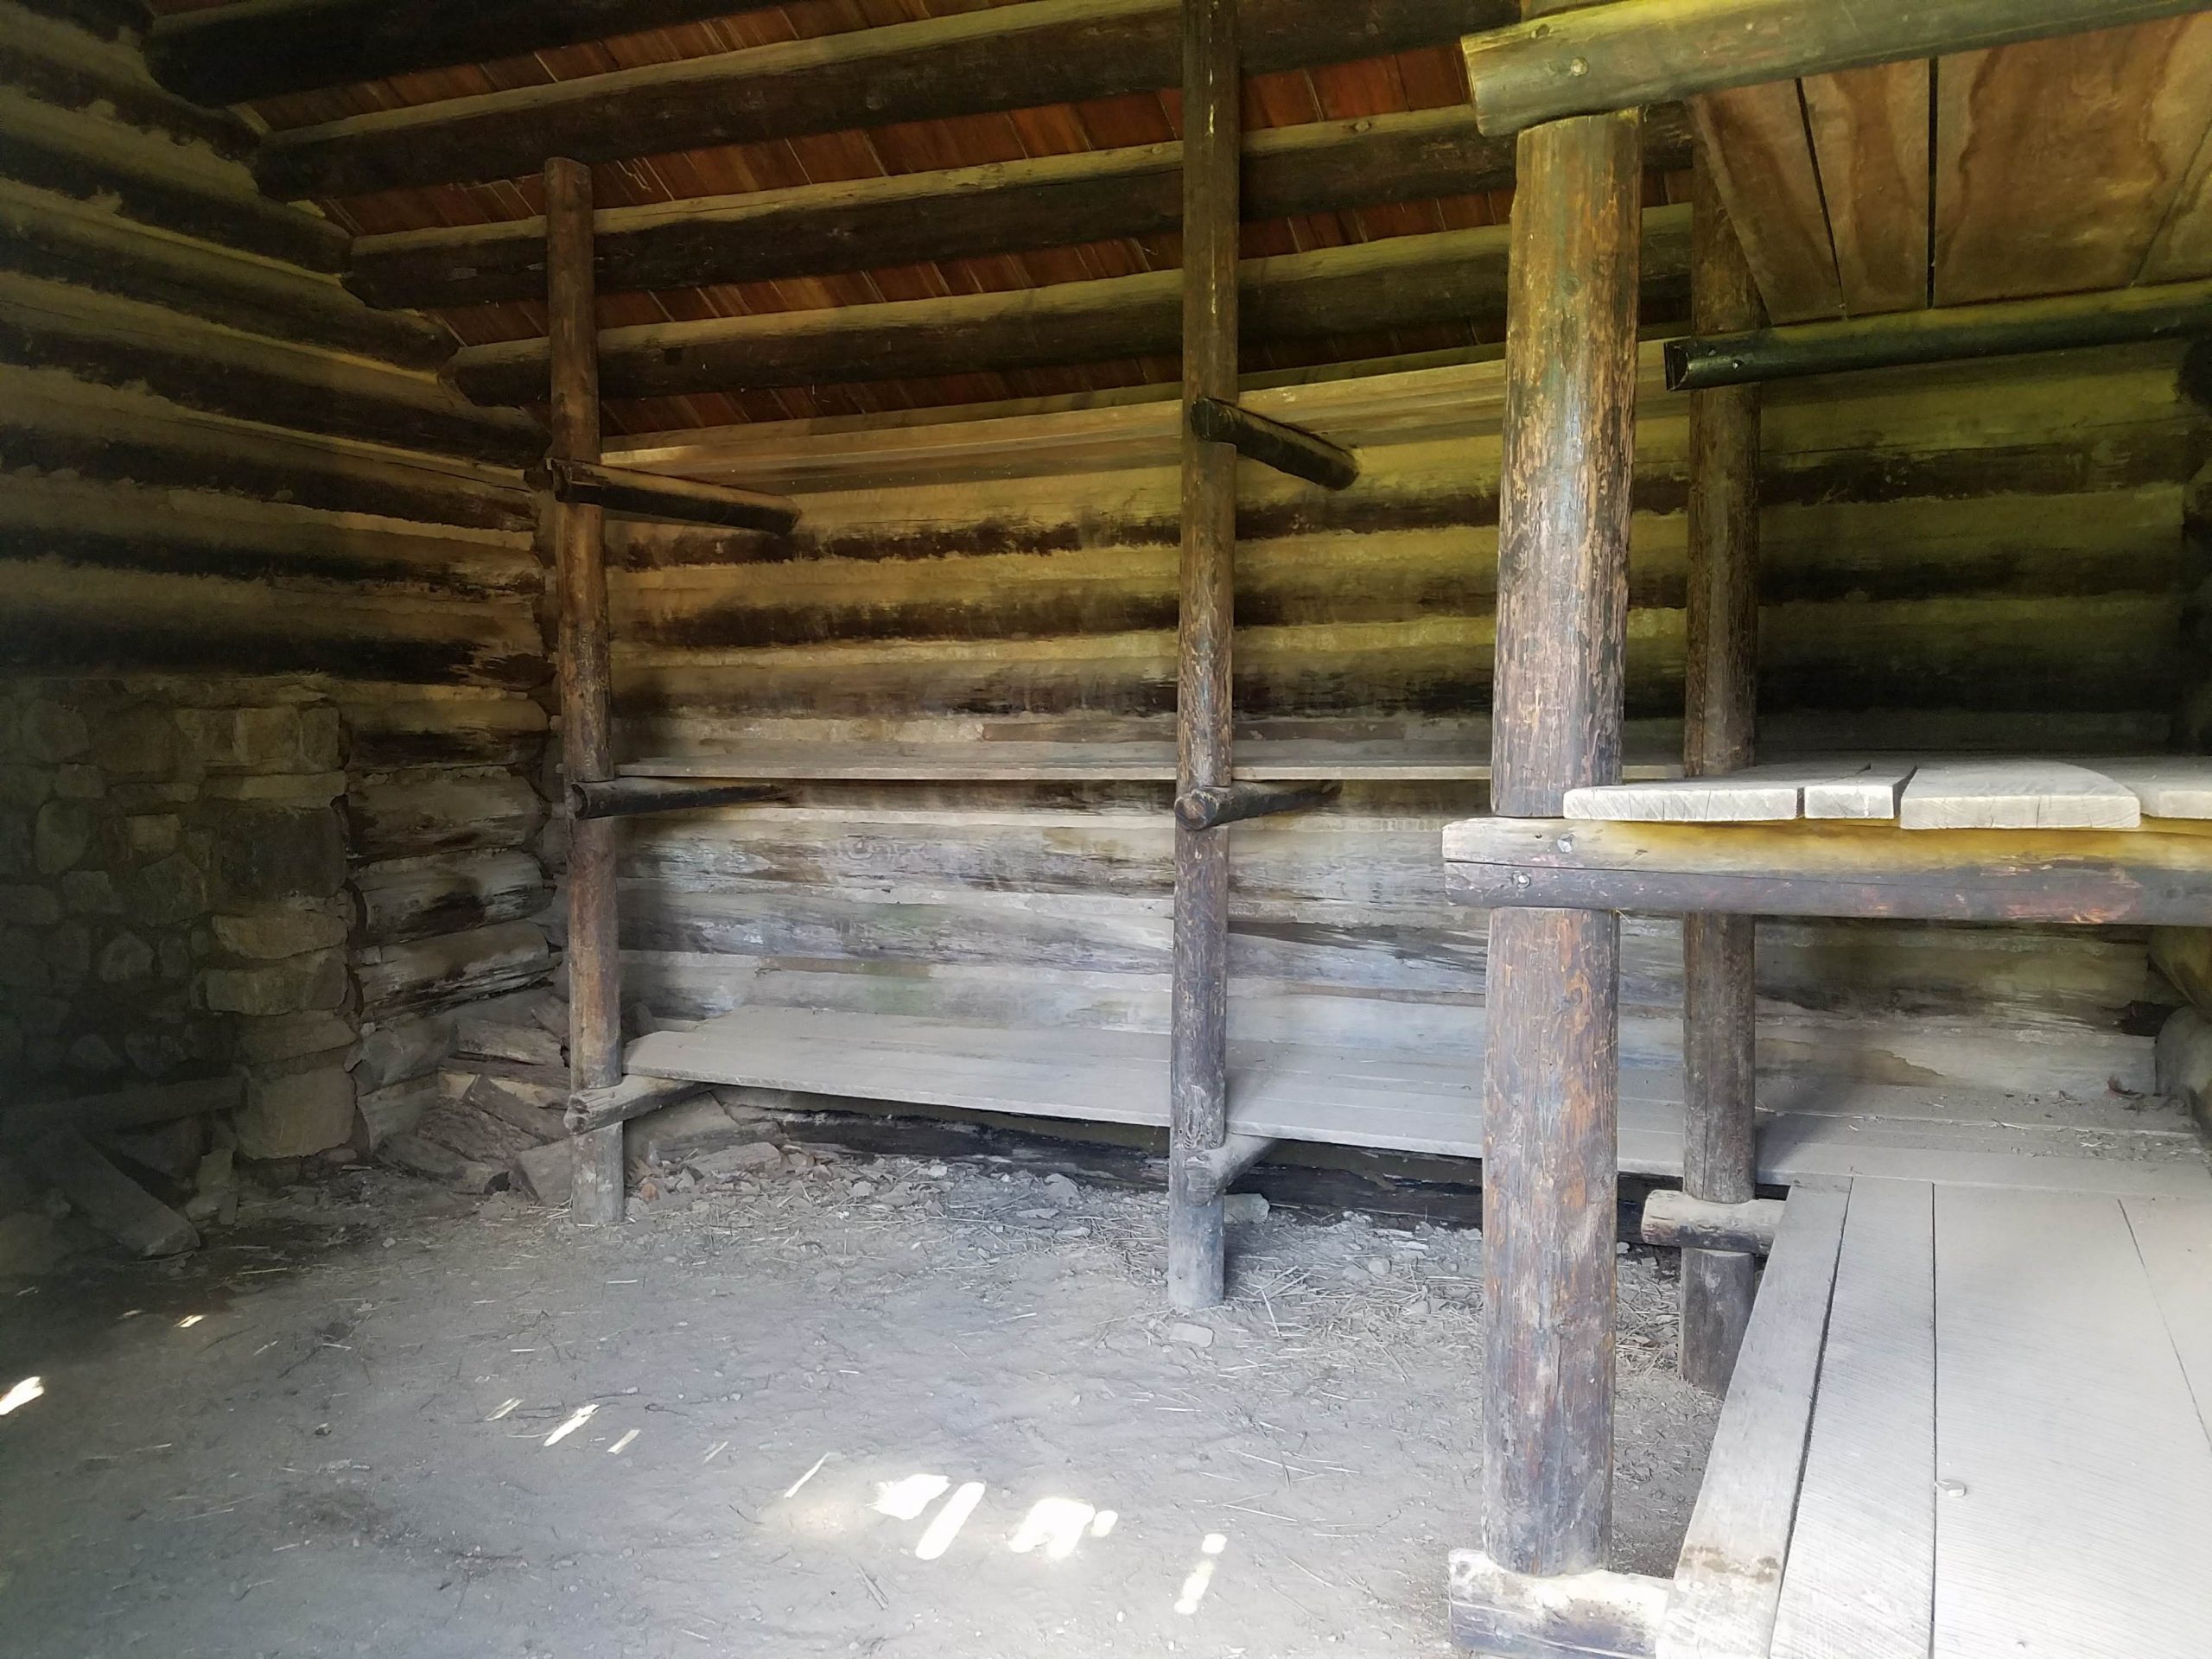 A photo of the wooden plank beds and dirt floor inside of the wooden cabins